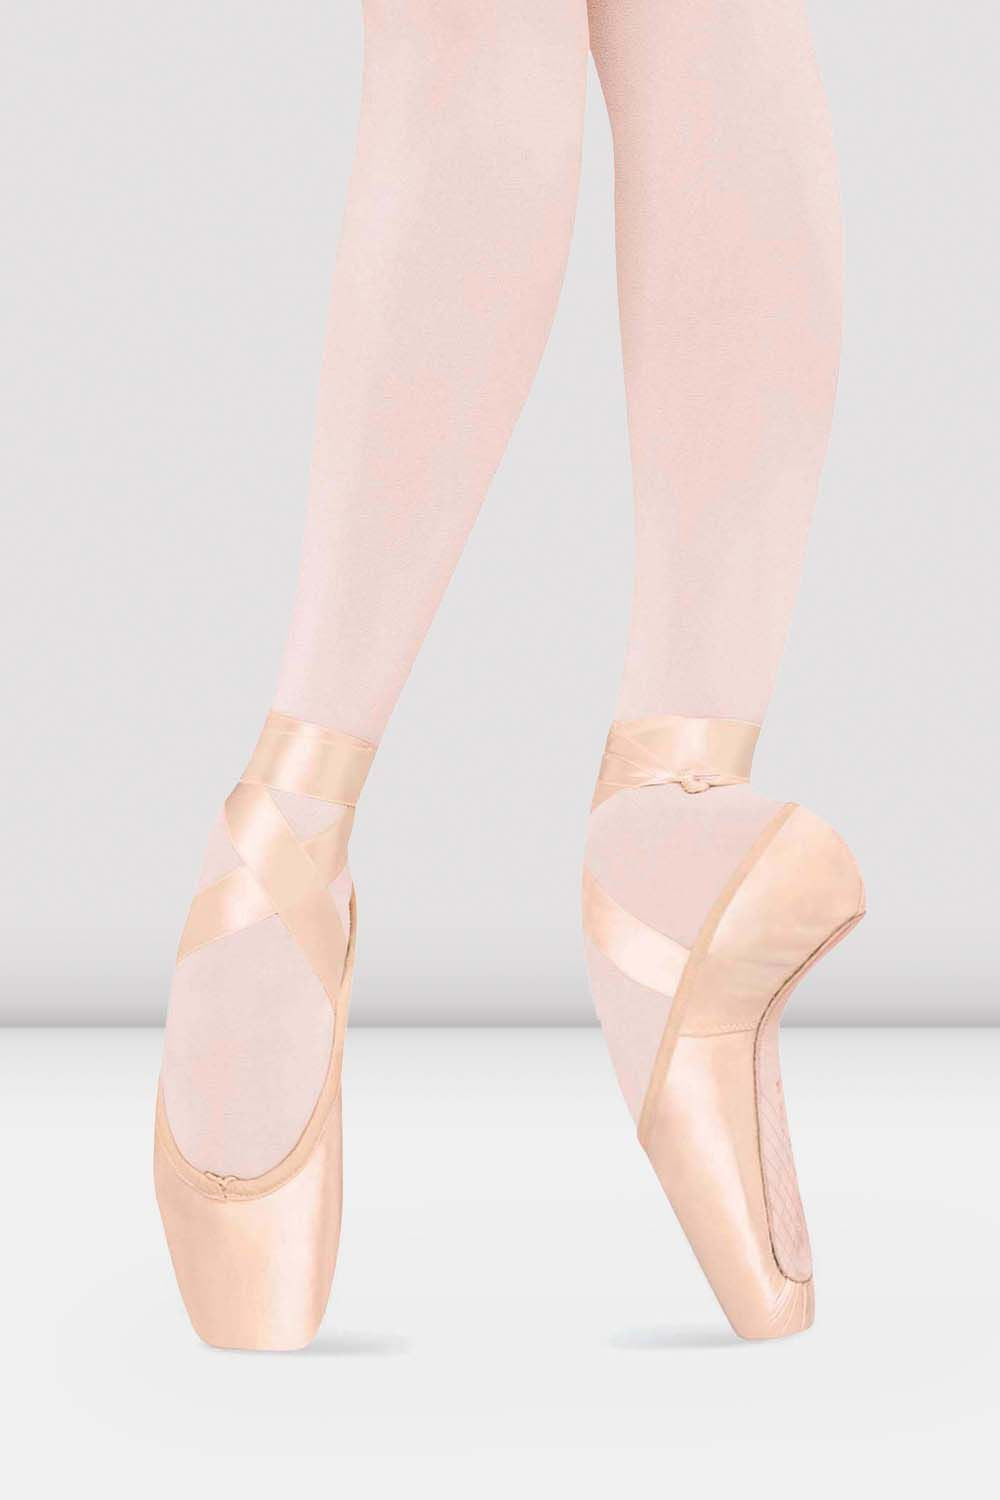 How to Sew Elastics on Ballet Shoes – BLOCH Dance US